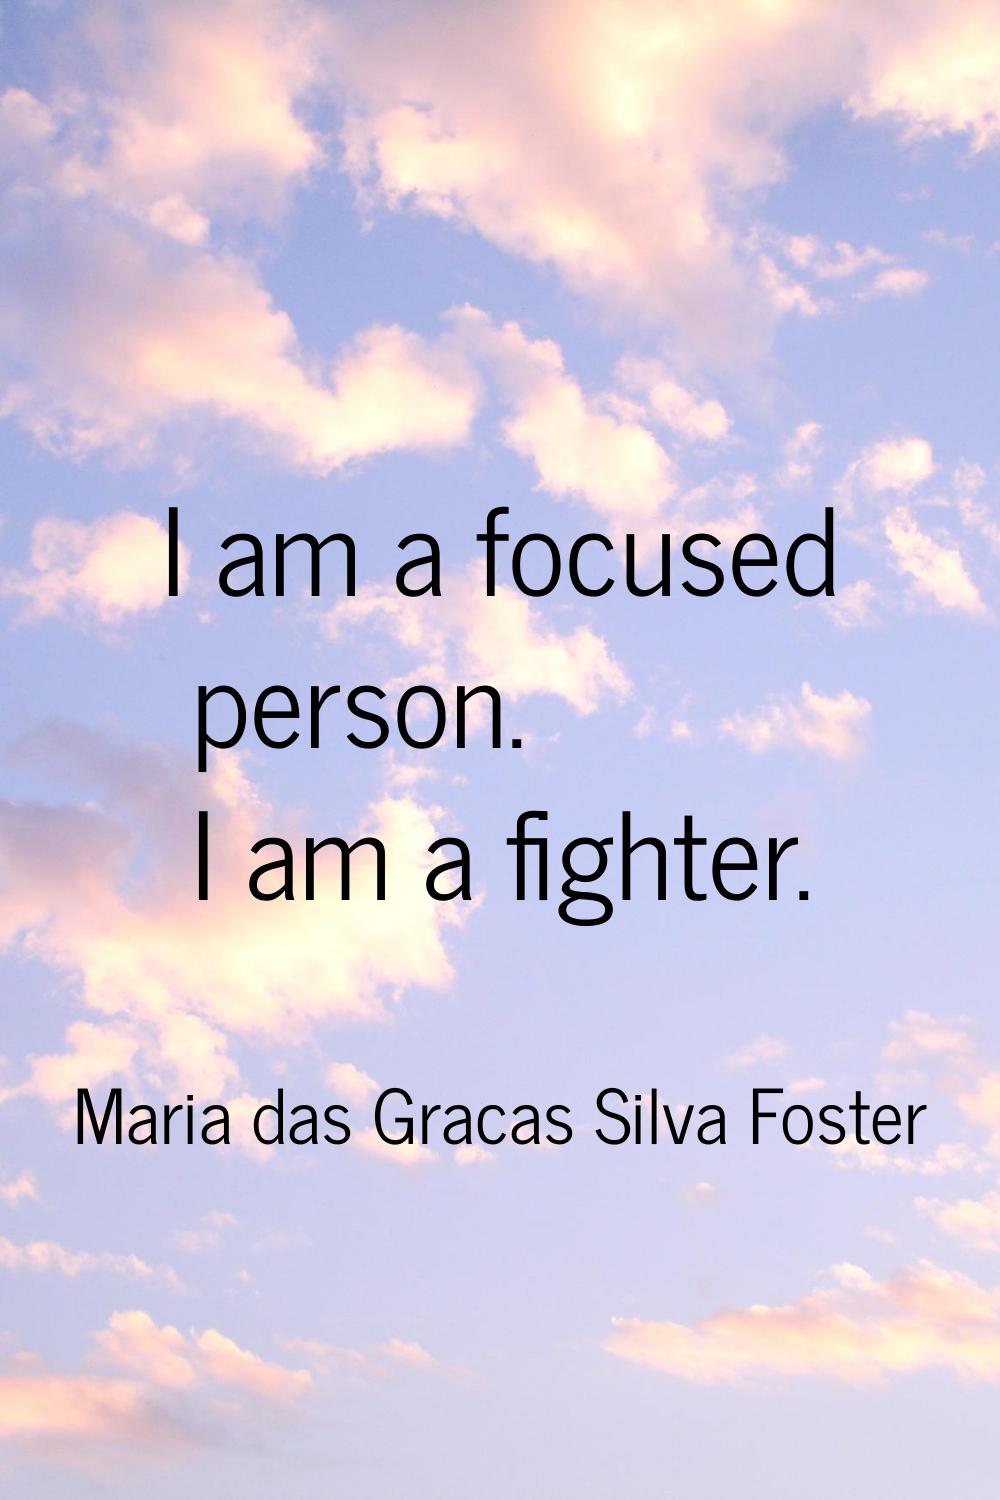 I am a focused person. I am a fighter.